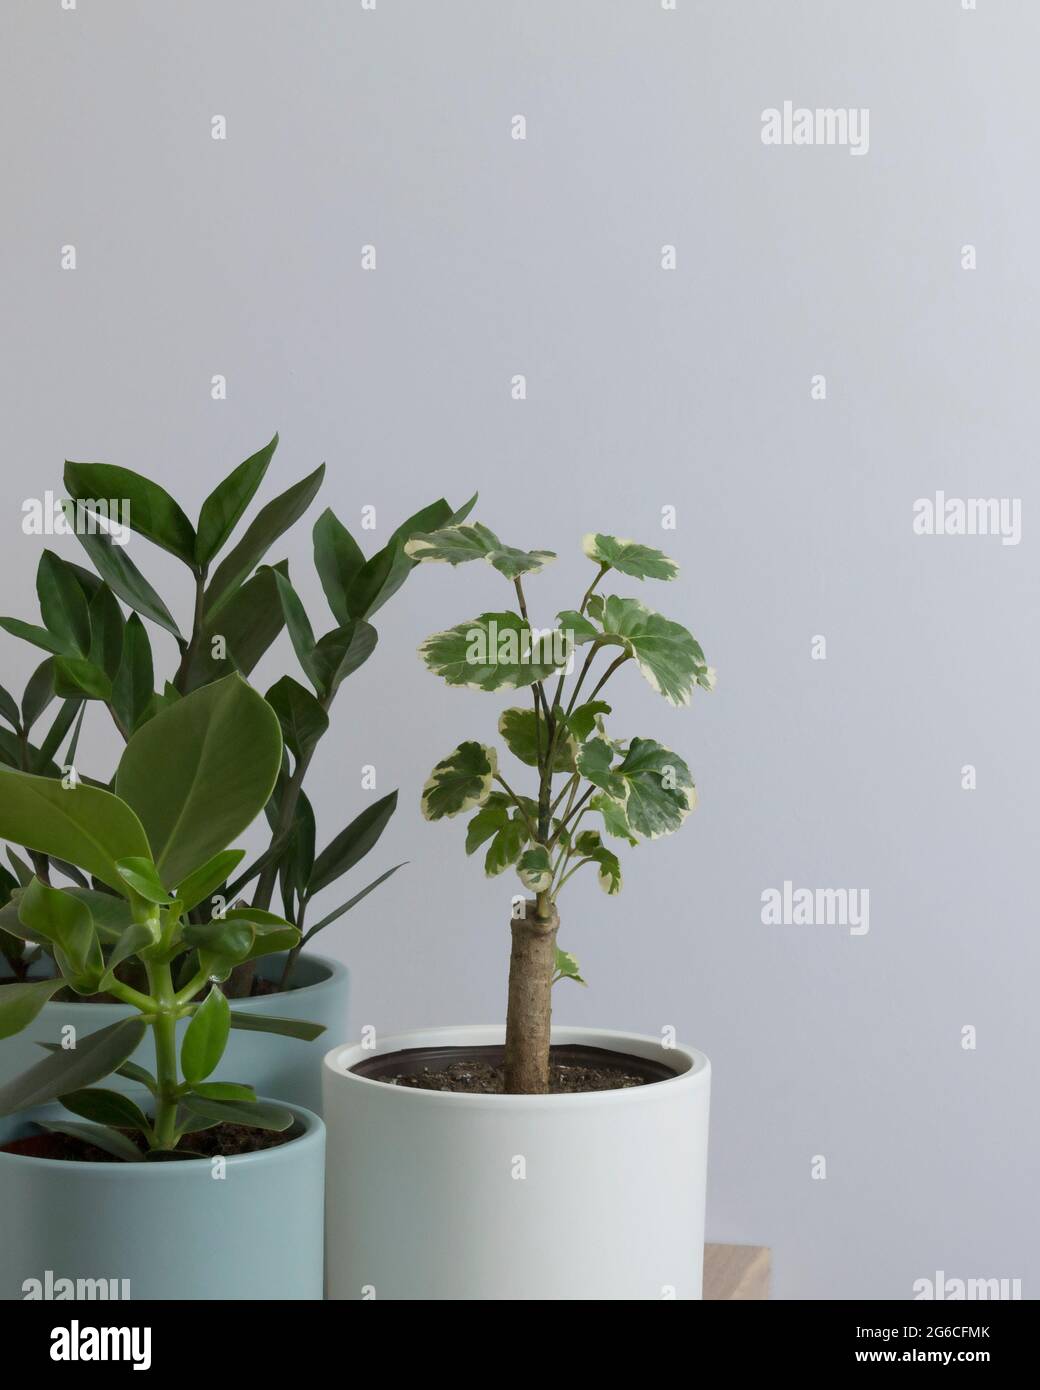 indoor plants in pots on a gray background Stock Photo